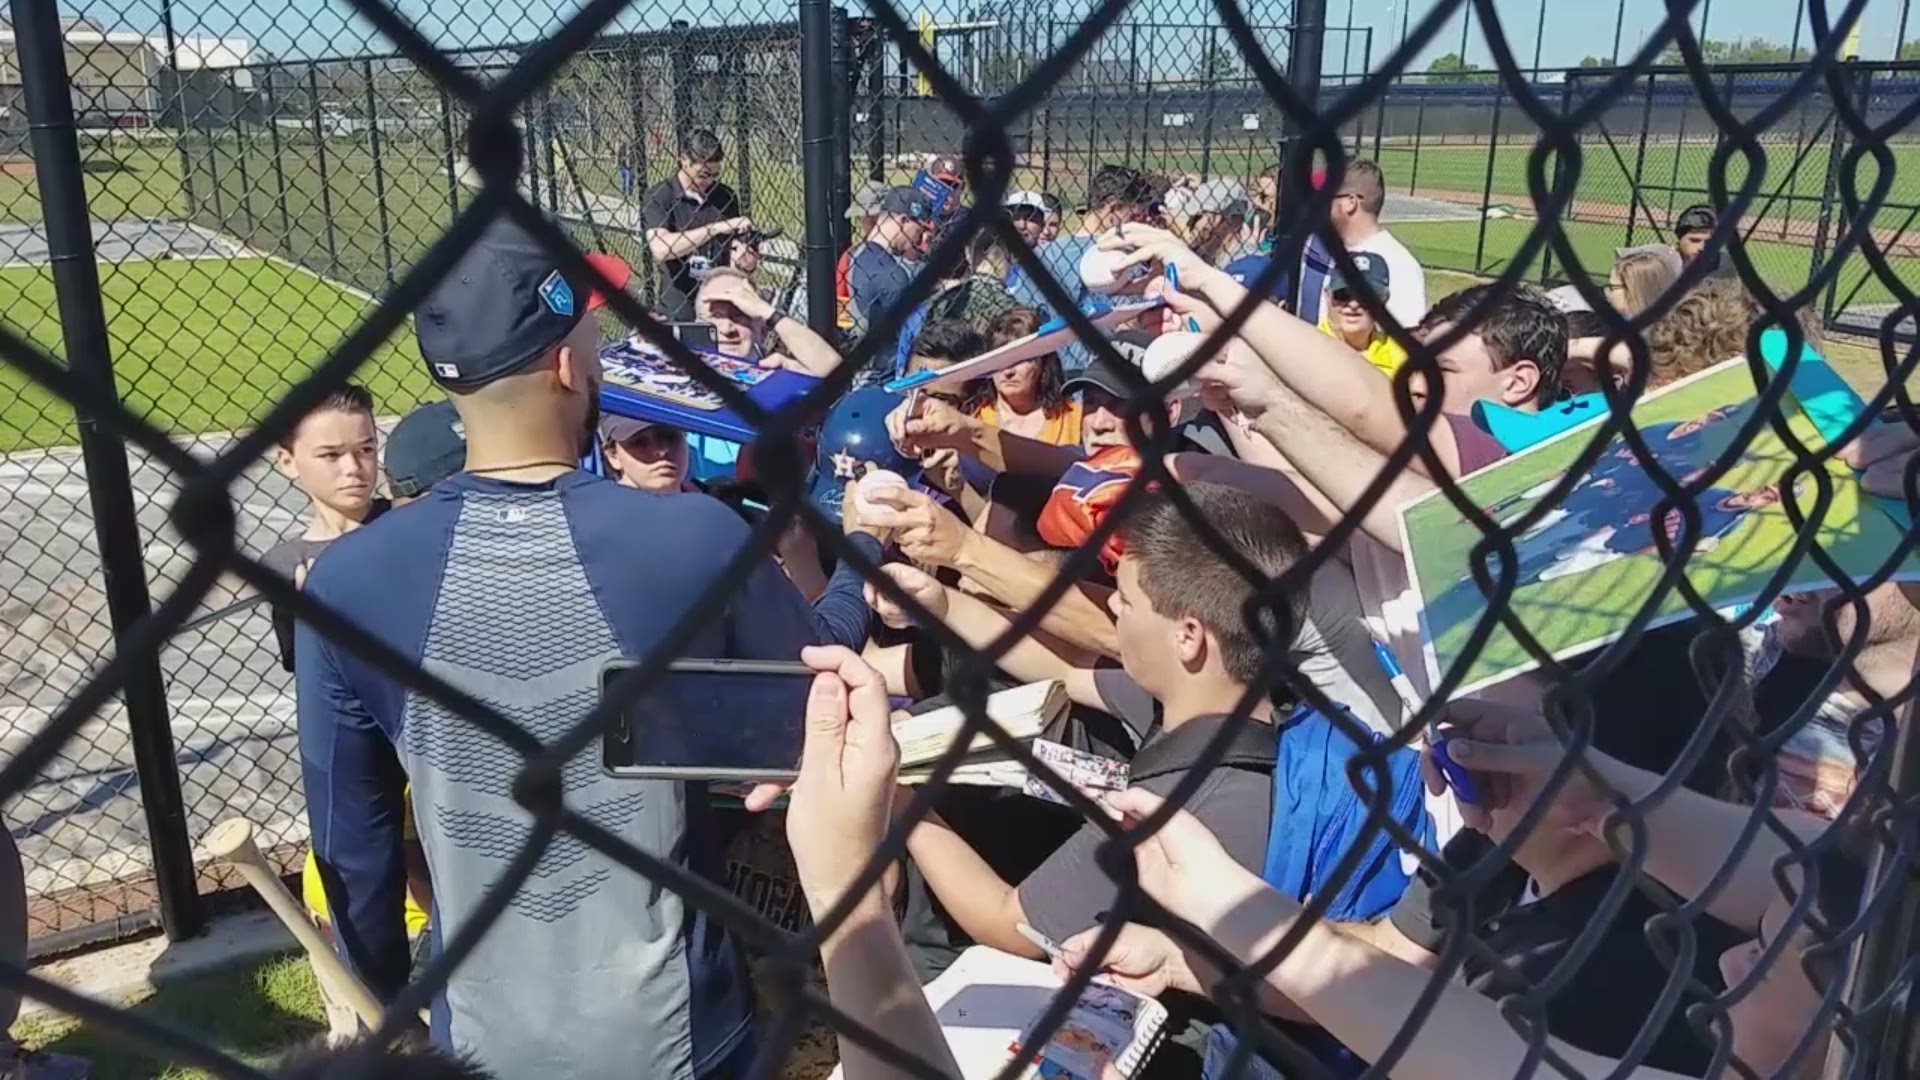 Fans showed Carlos Correa some love after practice Friday morning.